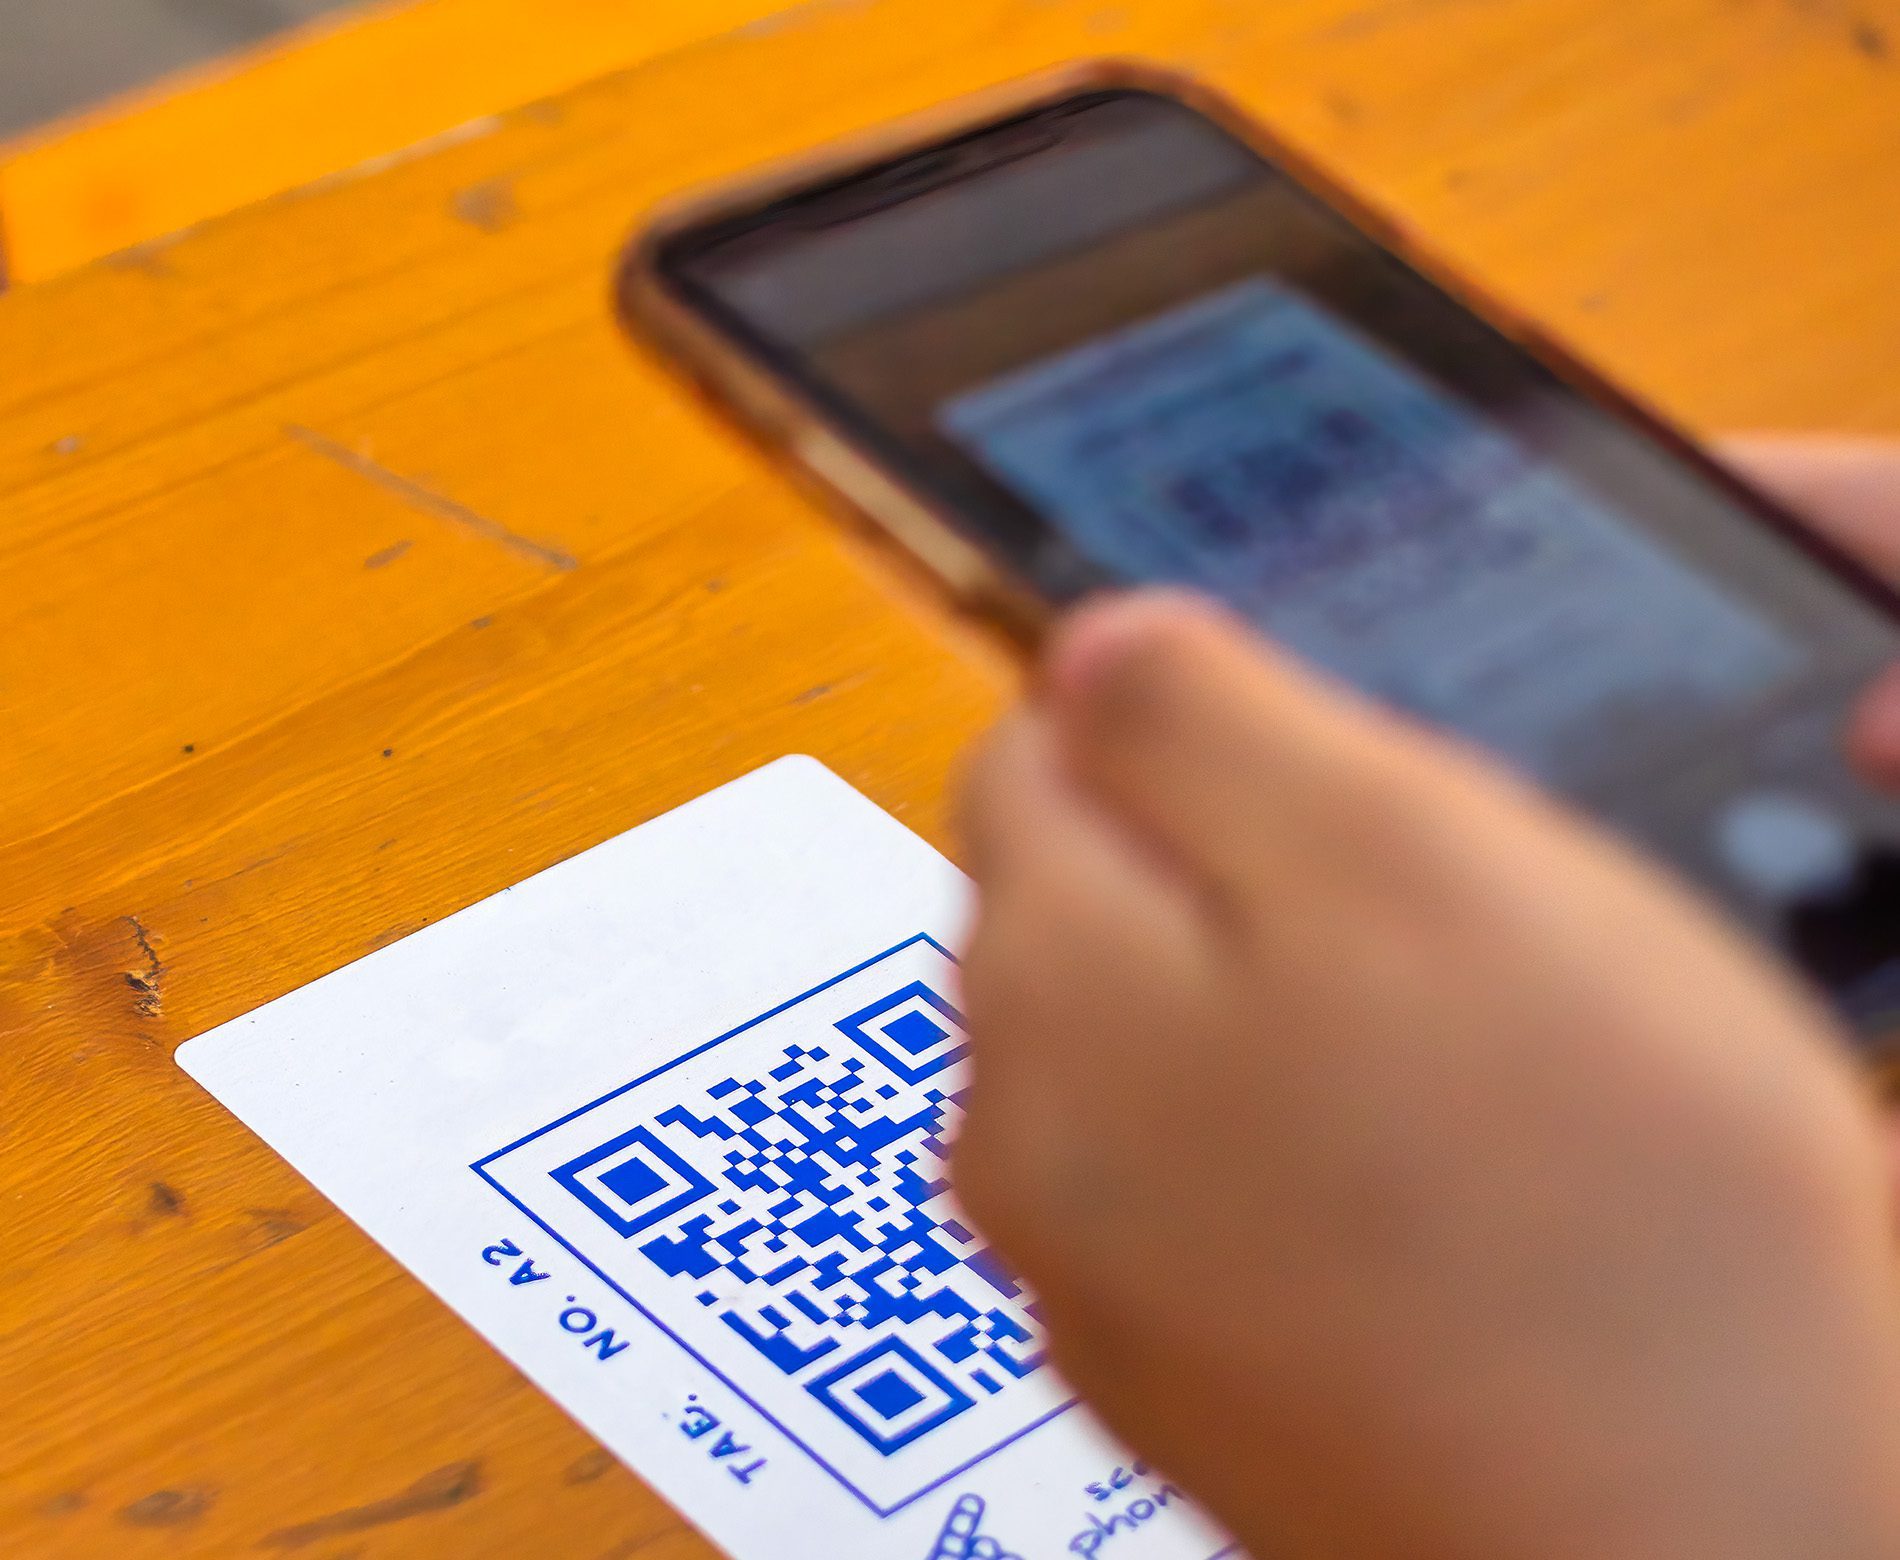 A WiFi QR code is an uncomplicated way to pass on complicated WiFi access data to visitors or acquaintances (Photo: Unsplash).